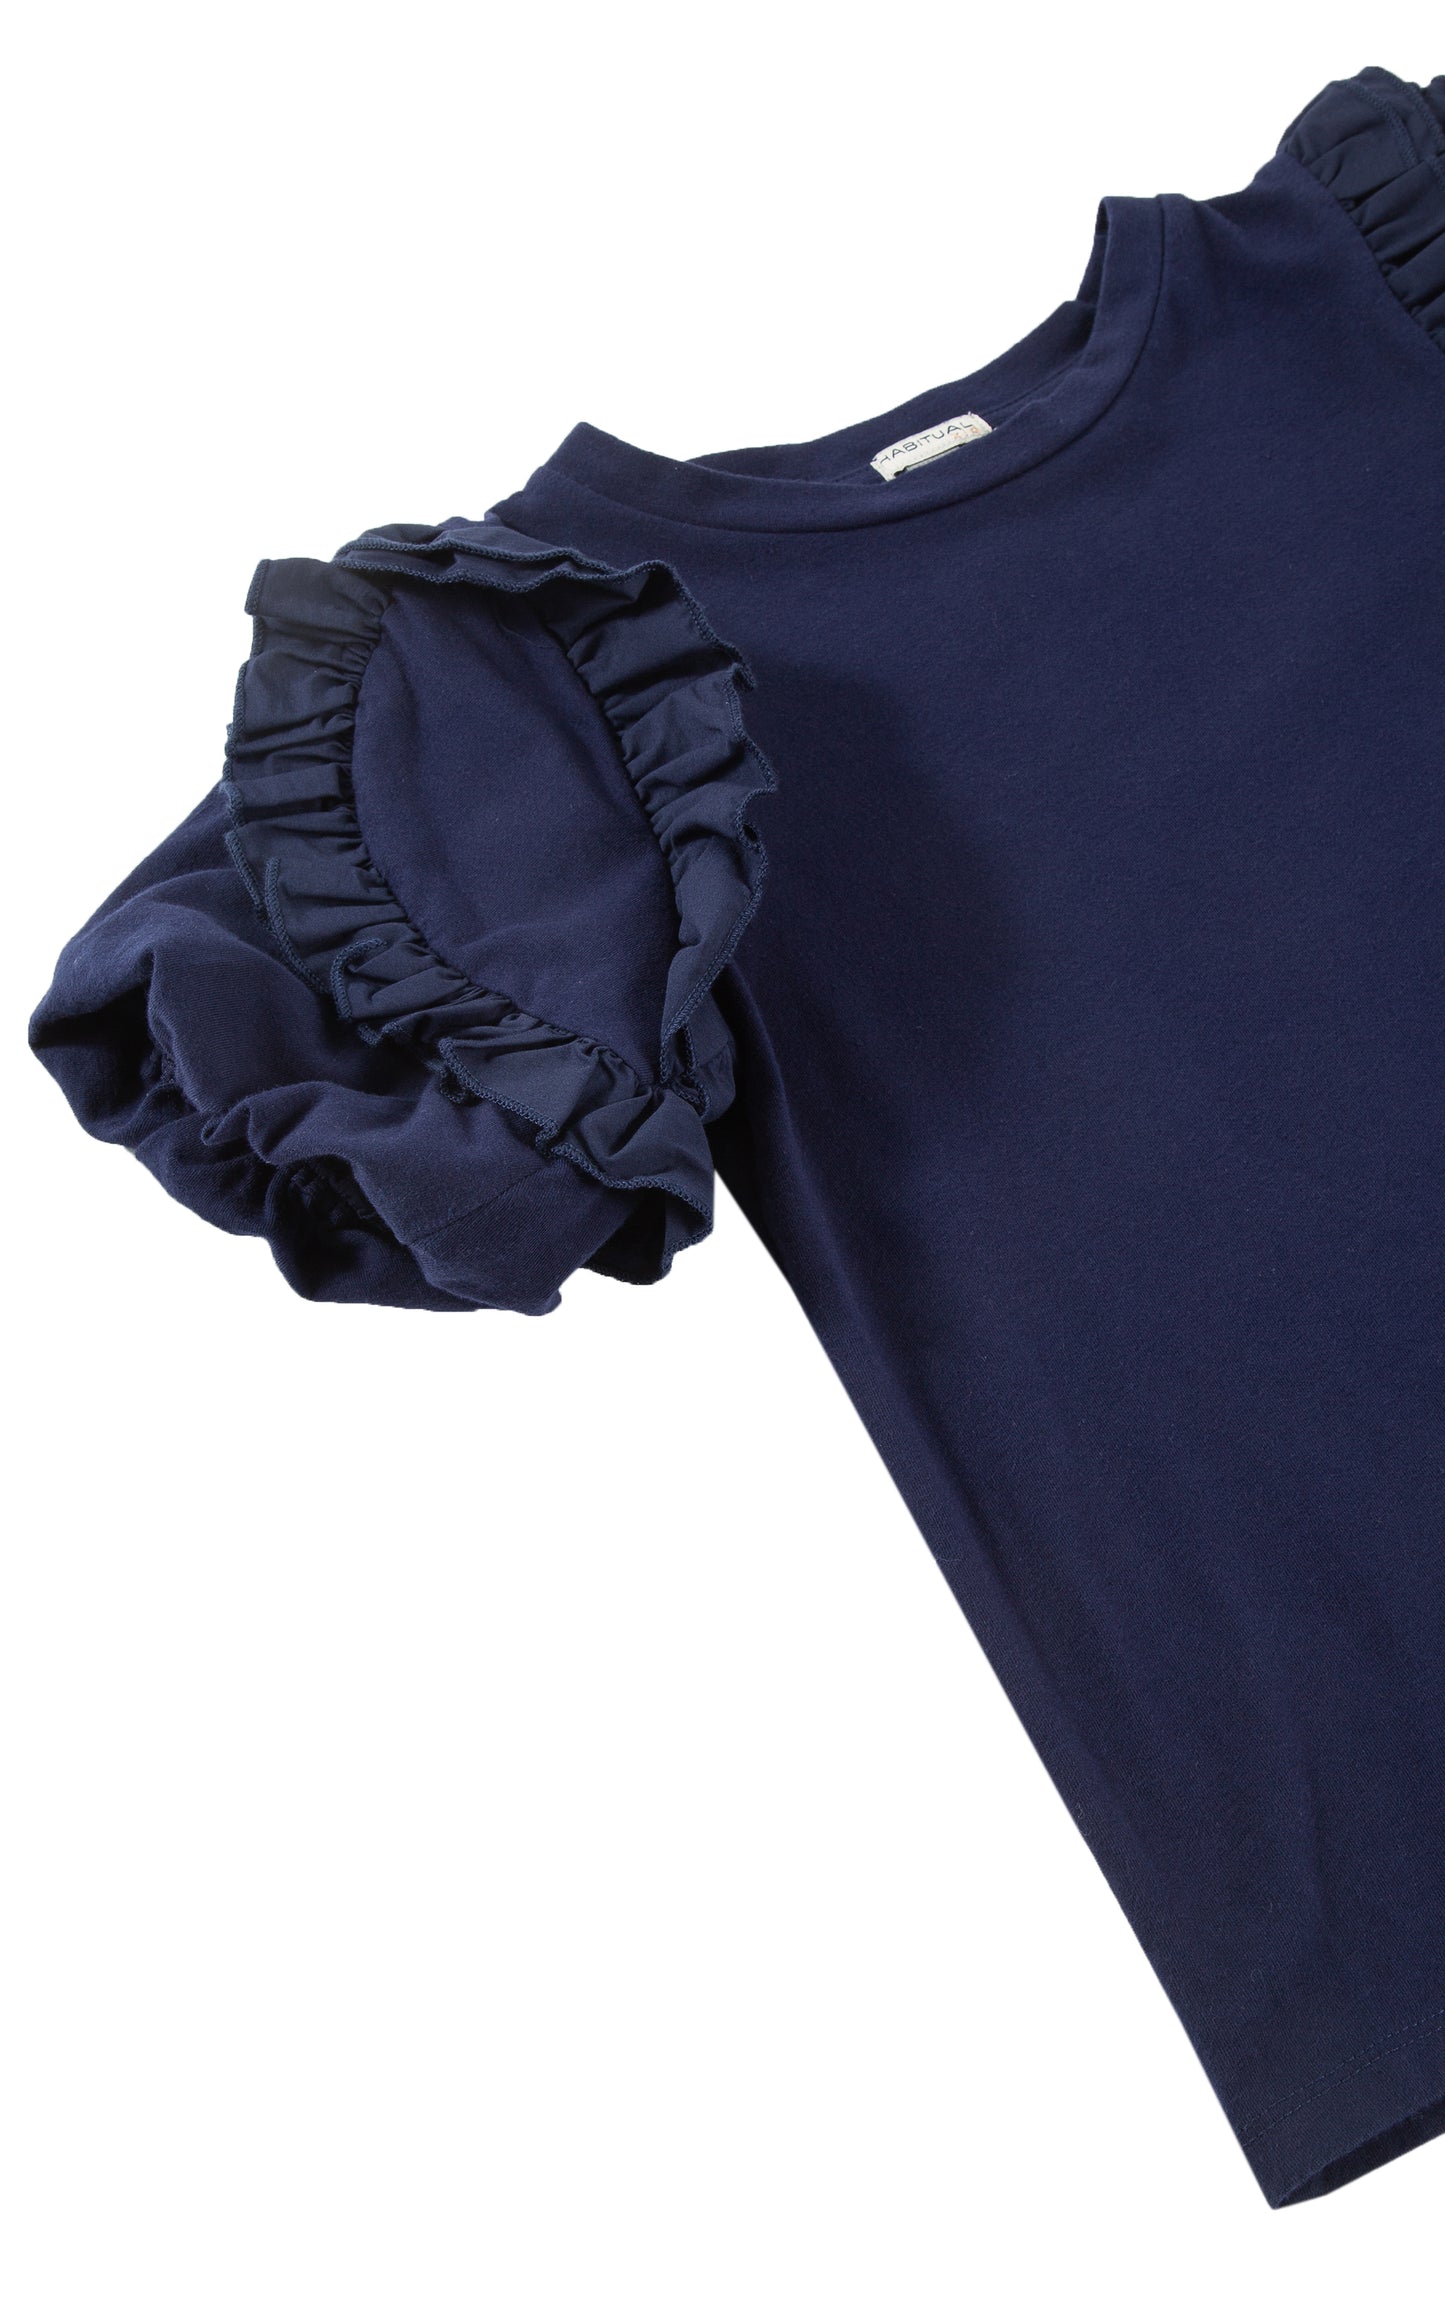 CLOSE UP OF DARK BLUE T-SHIRT WITH PLEATED RUFFLED SLEEVES